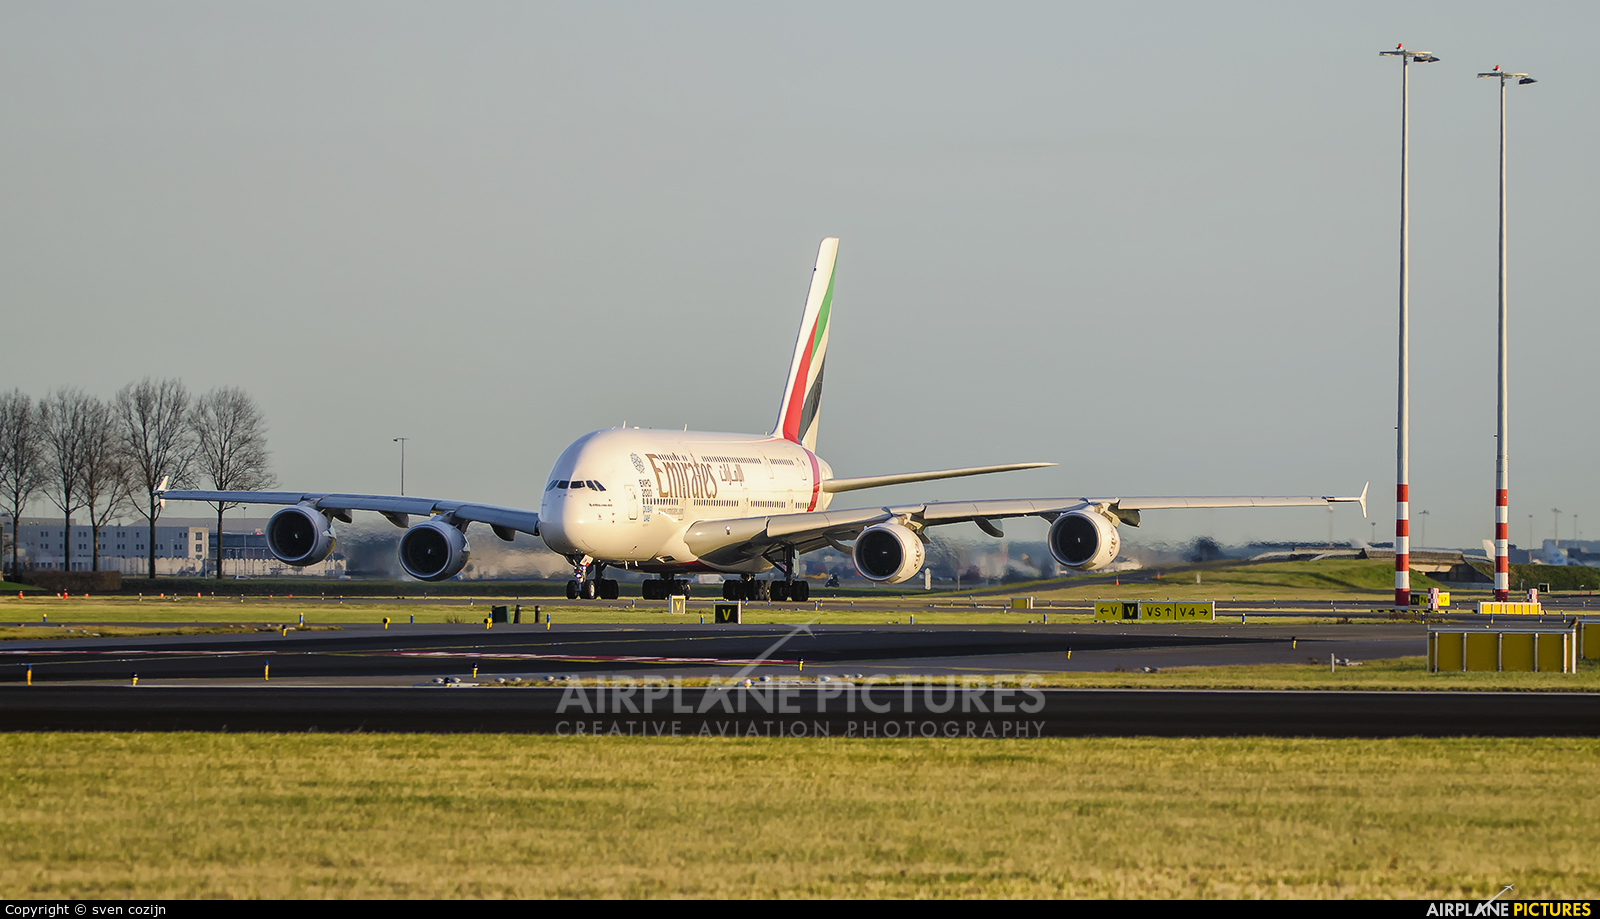 Emirates Airlines A6-EEW aircraft at Amsterdam - Schiphol